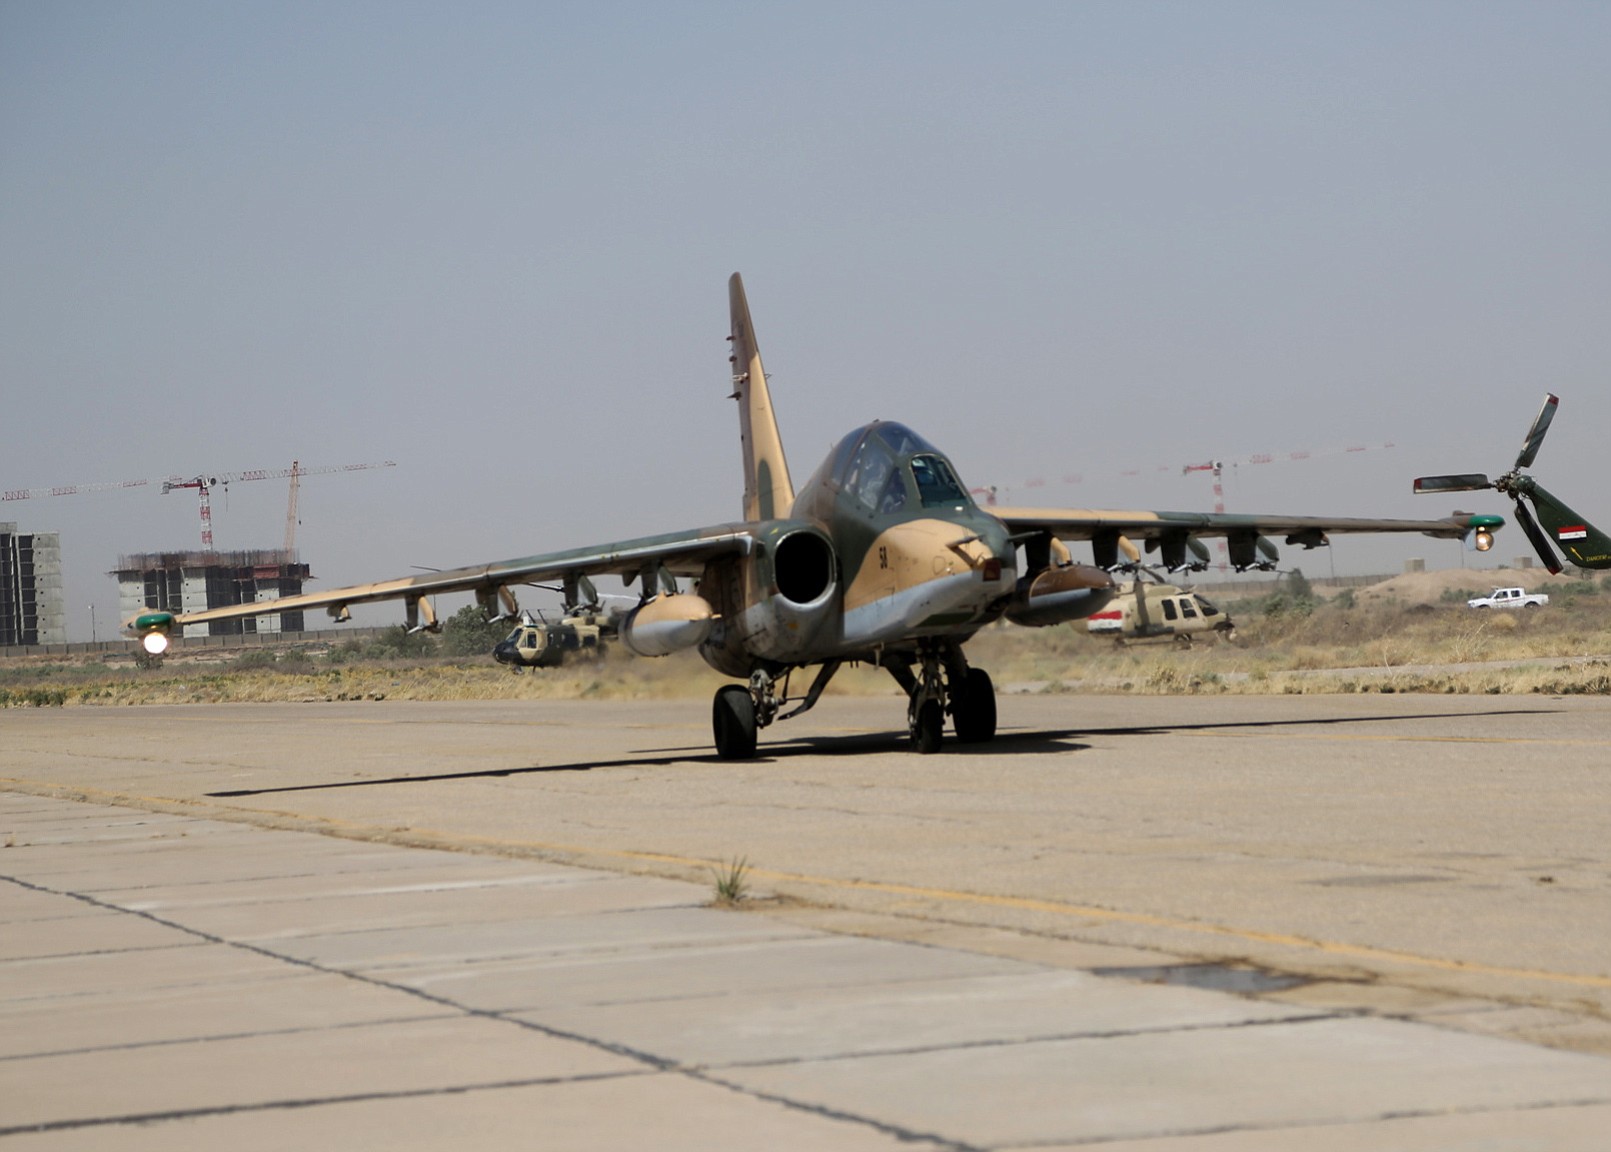 A Russian fighter jet arrives at al-Muthanna air base in Baghdad, Iraq, Tuesday, July 1, 2014. Iraq is increasingly turning to other governments like Iran, Russia and Syria to help beat back a rampant insurgency because it cannot wait for additional American military aid, Baghdad's top envoy to the U.S.